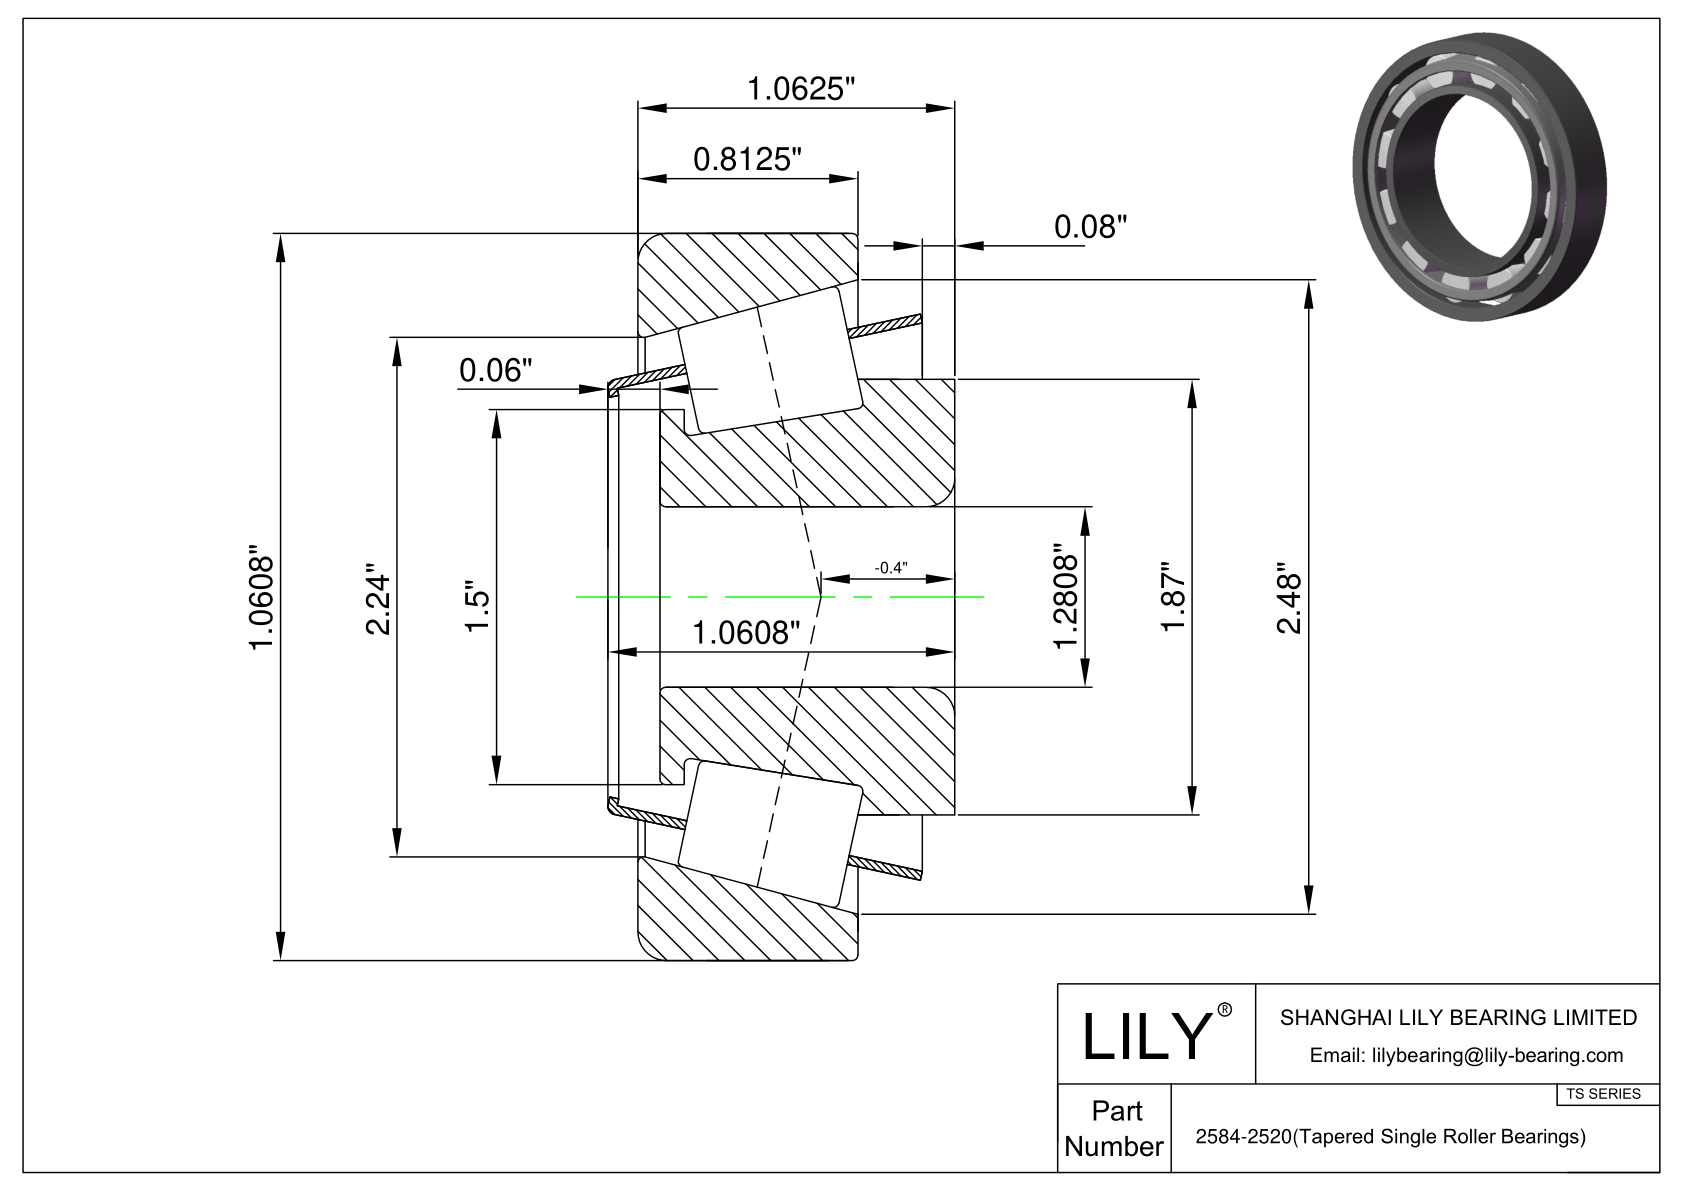 2584-2520 TS (Tapered Single Roller Bearings) (Imperial) cad drawing